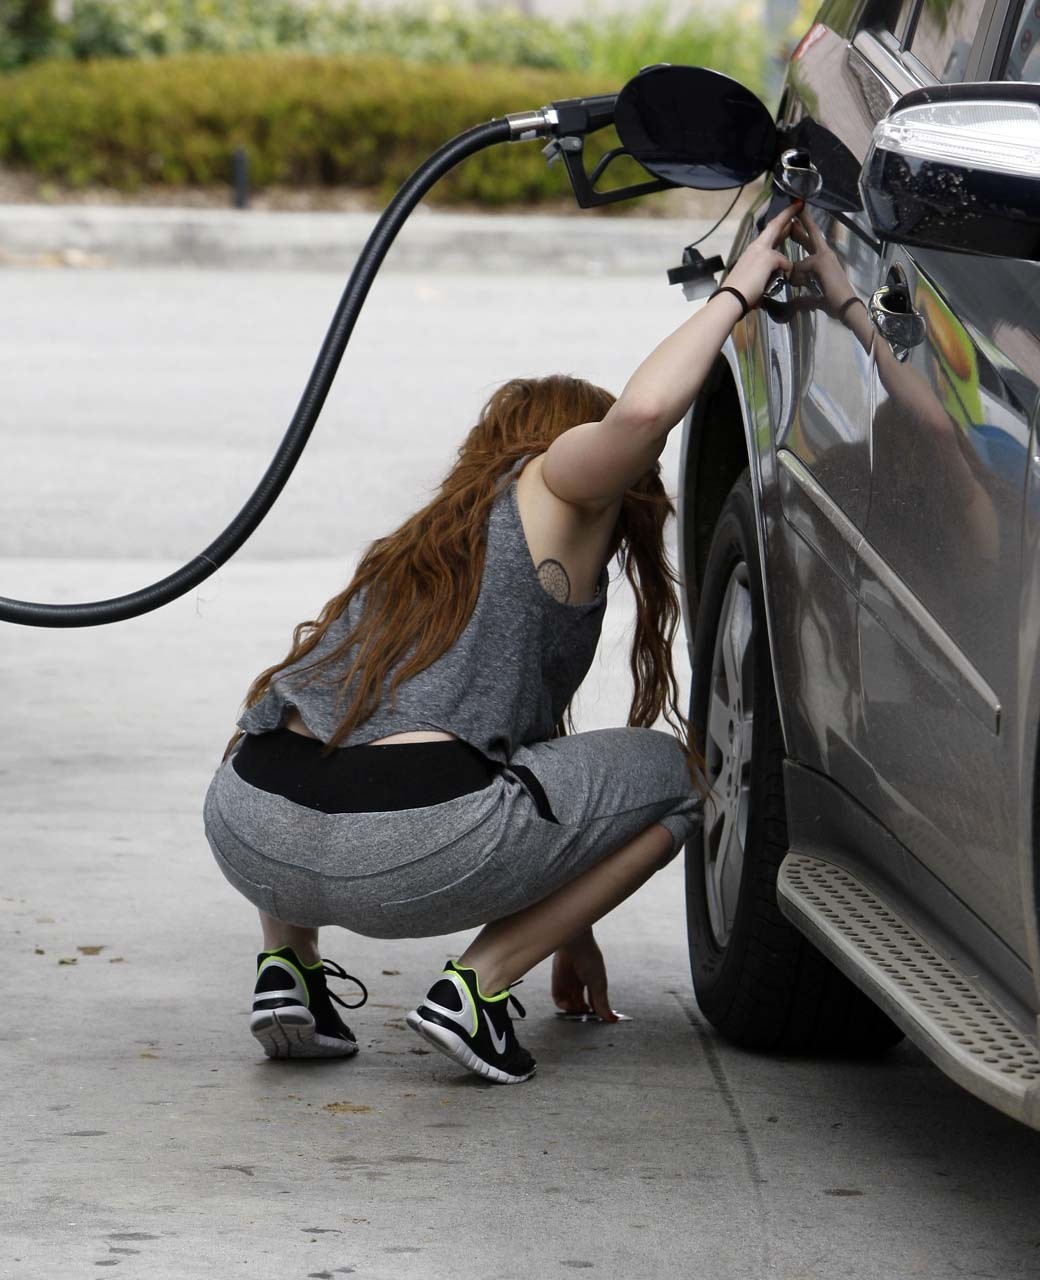 Miley Cyrus pumping gas on station and showing her great butt paparazzi pictures #75311253